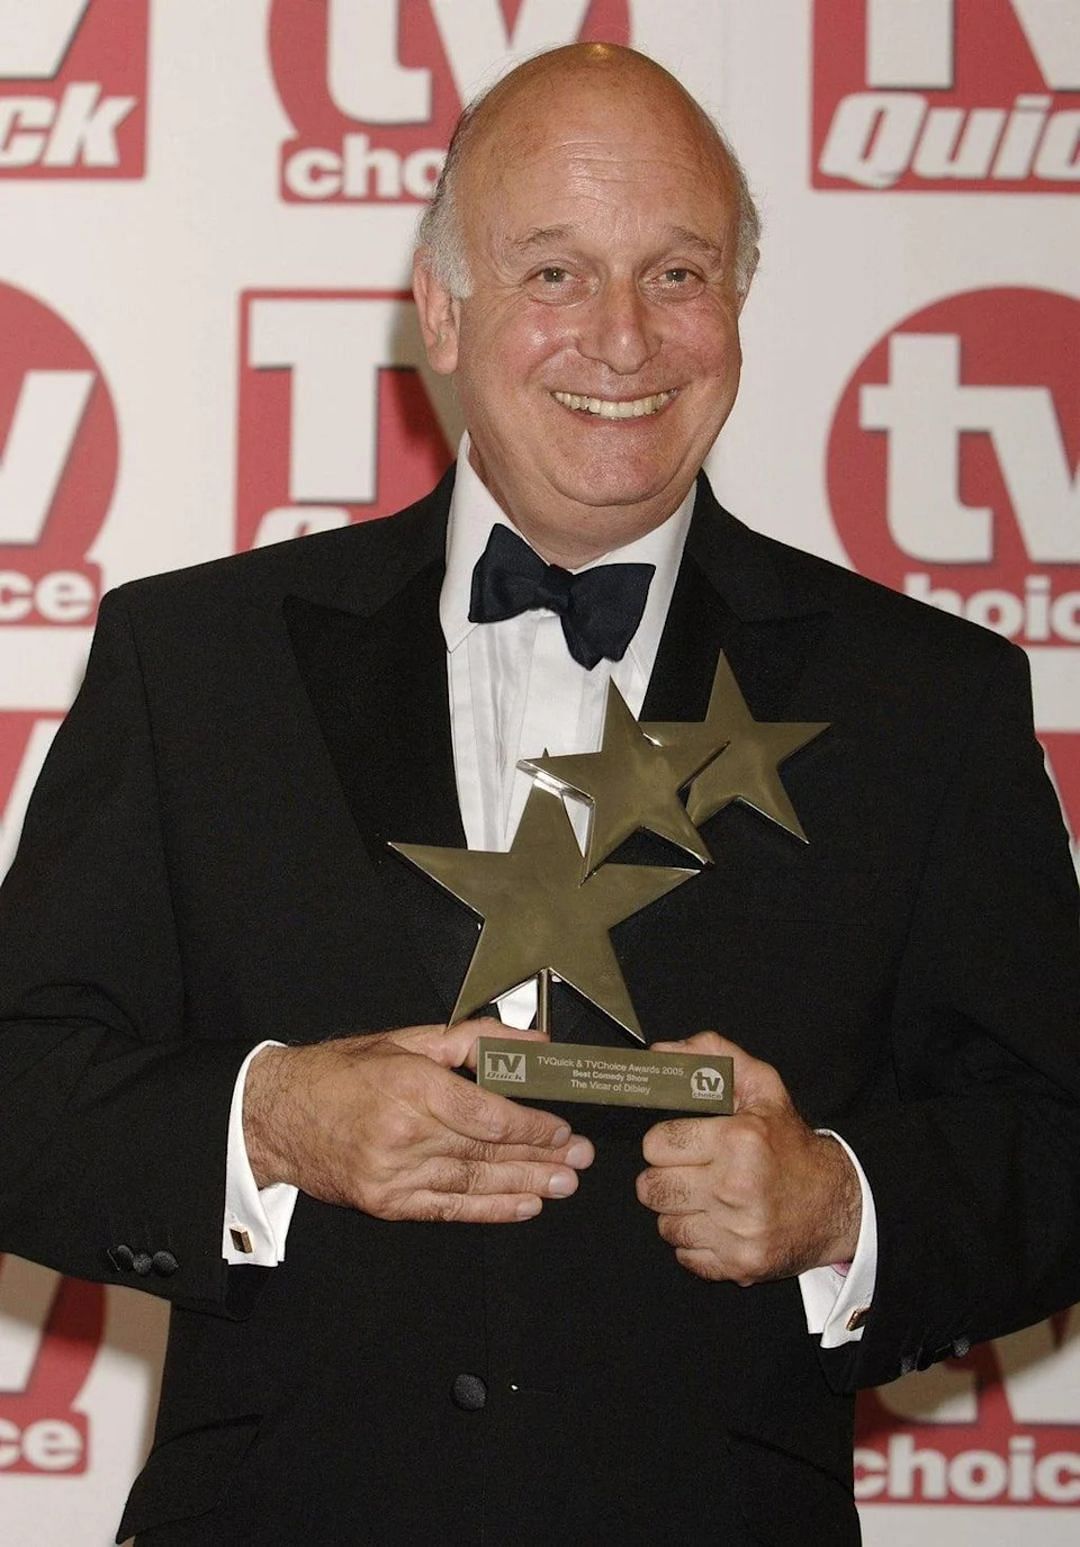 Waldhorn at the TV Quick and TV Choice Awards in 2005 (Image via Yui Mok/PA/Getty Images)